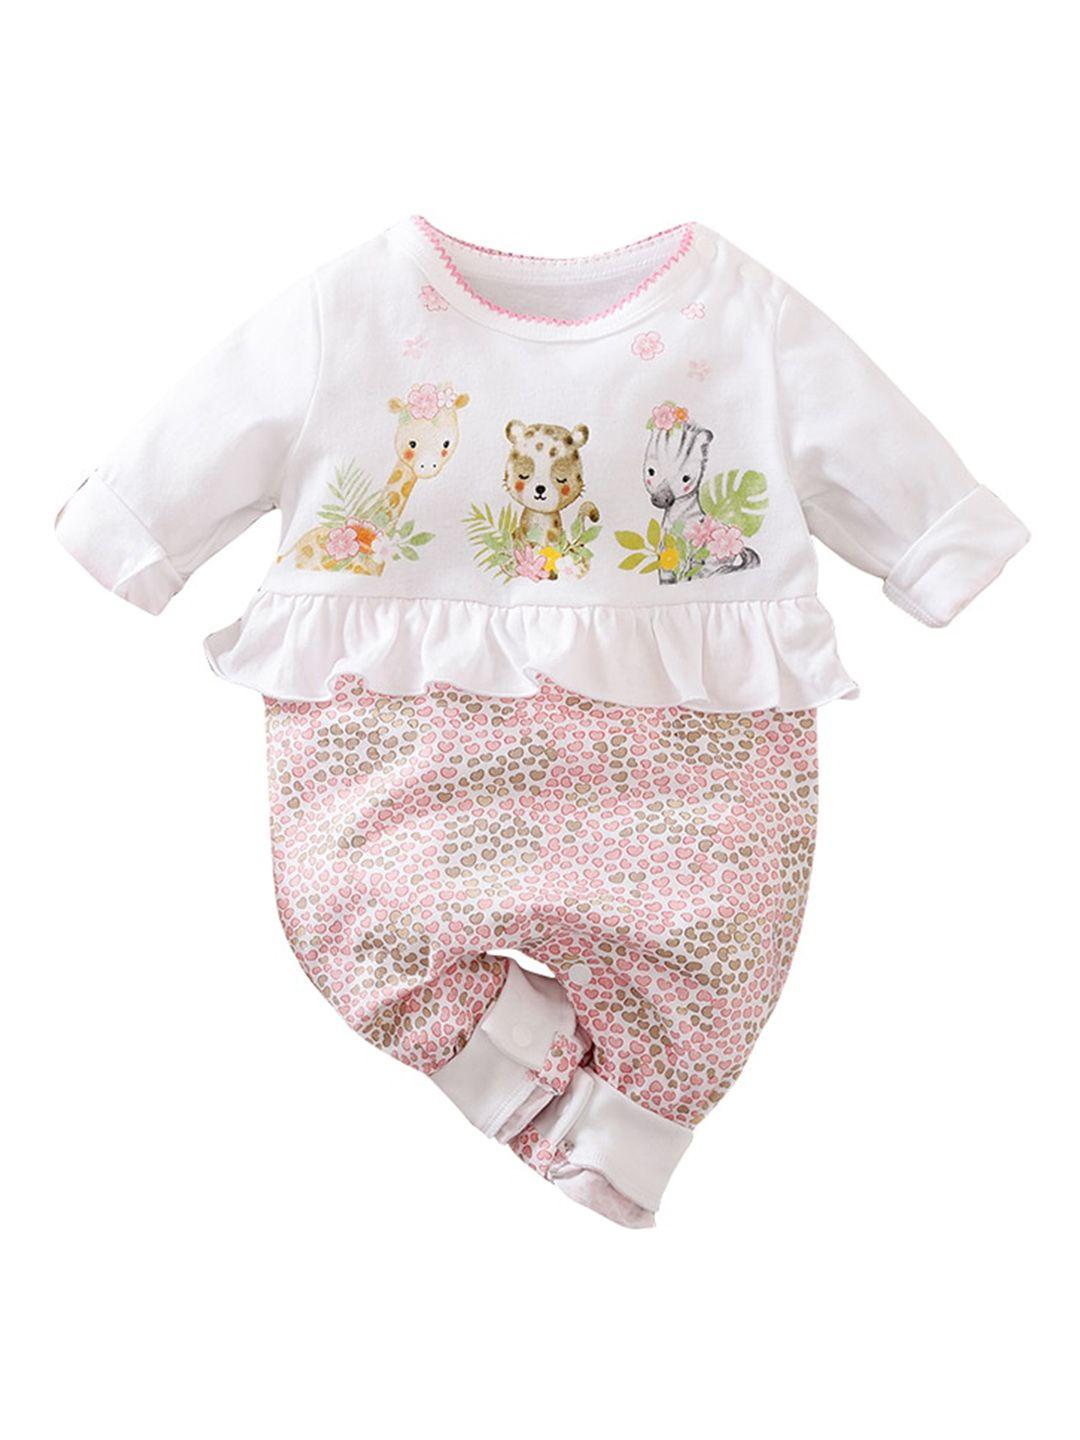 stylecast-infant-girls-pink-printed-cotton-romper